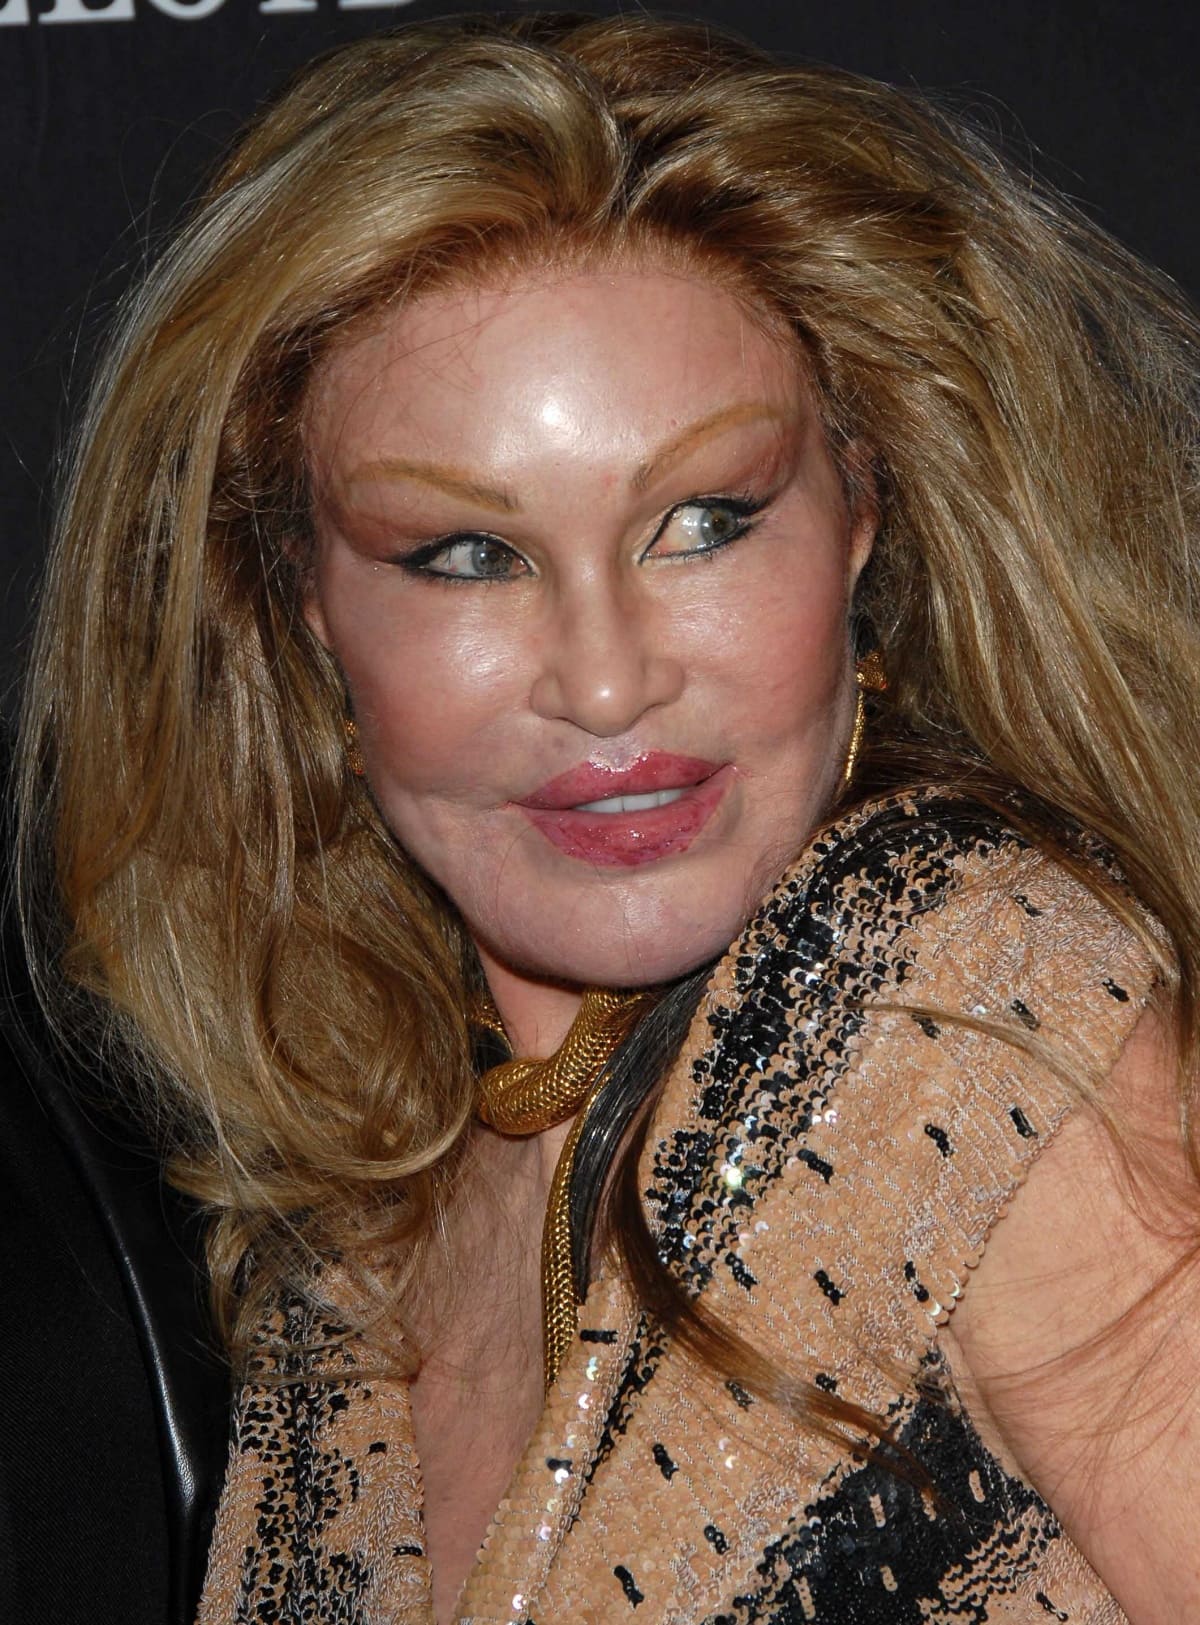 Jocelyn Wildenstein attending the Lloyd Klein Flagship Retail Store, Showroom, and Studio launch party